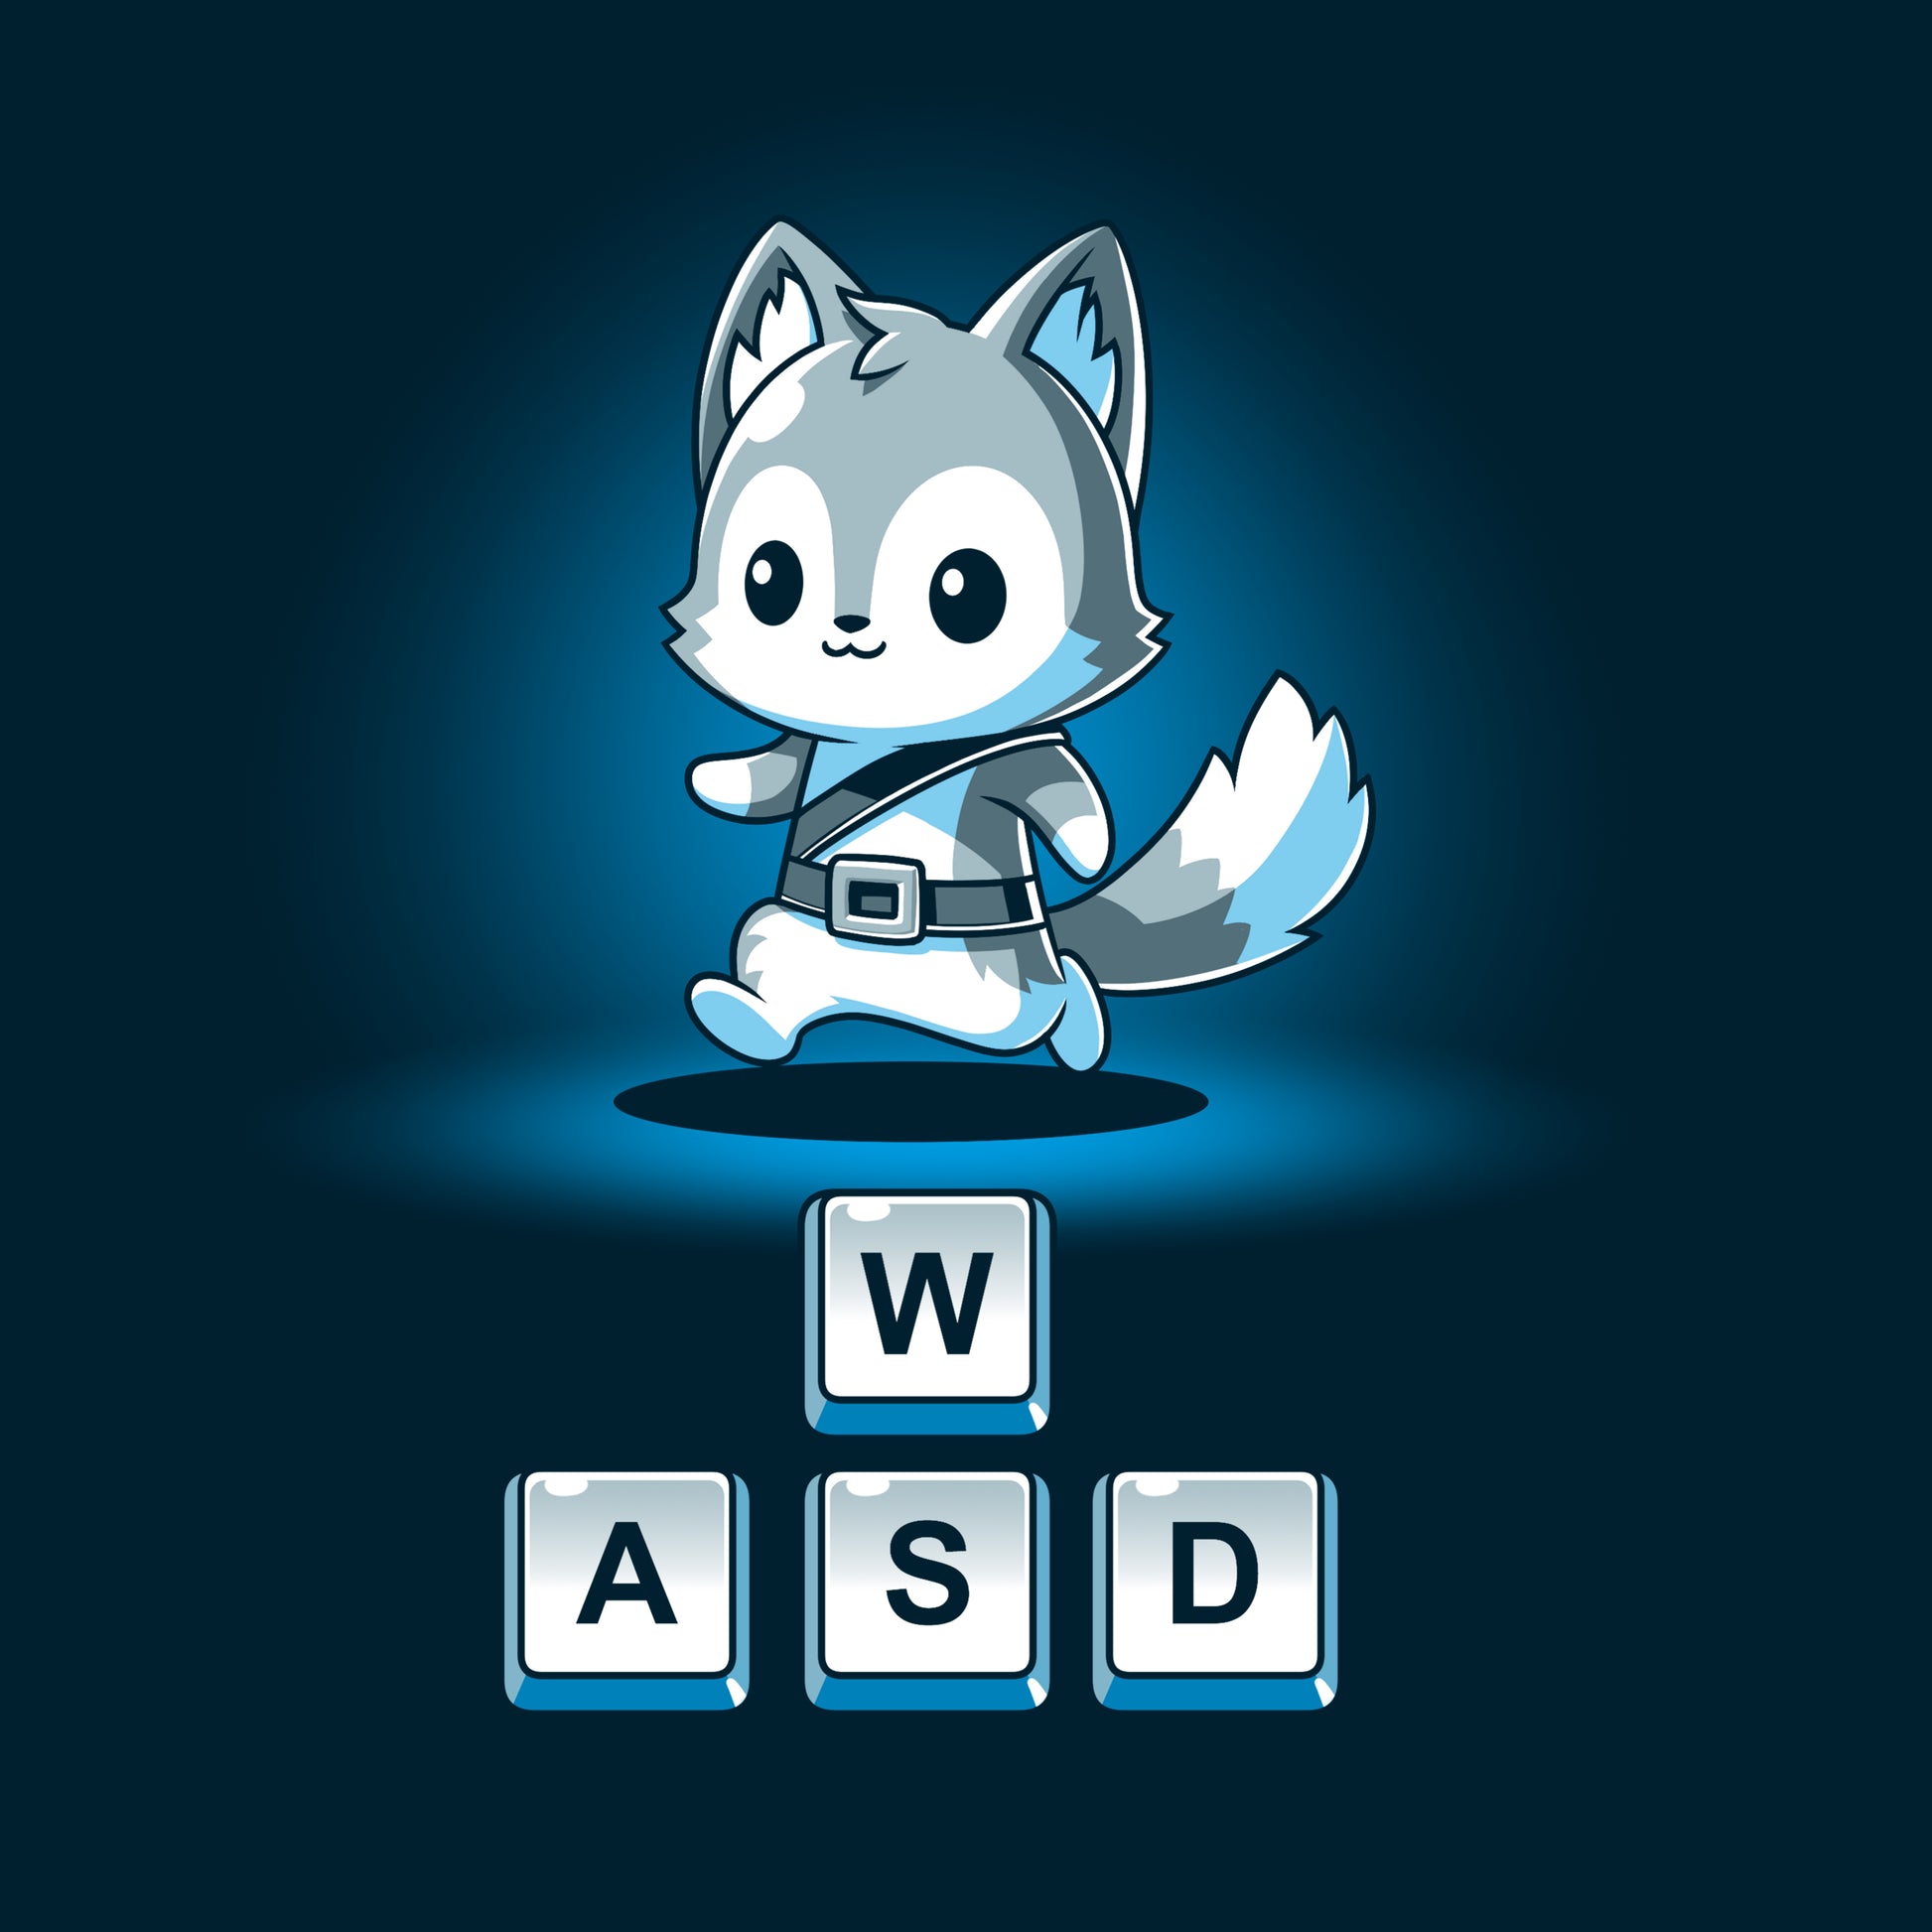 A cute, blue animated fox character is walking. Below it are the W, A, S, and D keyboard keys commonly used in PC games. The design is printed on a super soft ringspun cotton, navy blue Keys to Adventure t-shirt by monsterdigital for ultimate comfort.